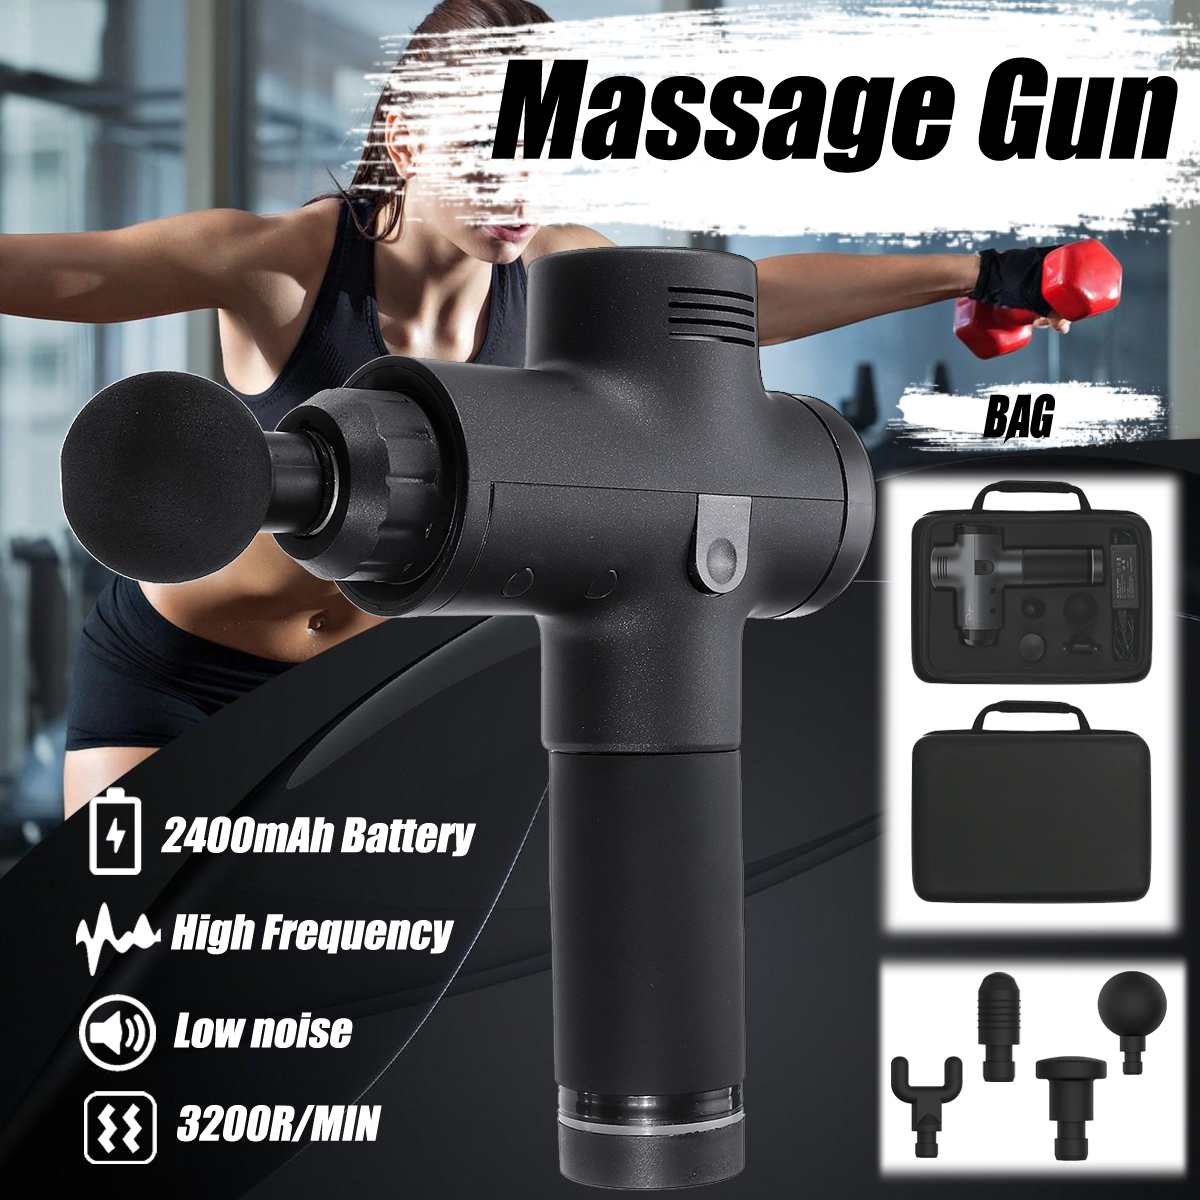 Muscle Therapy Gun